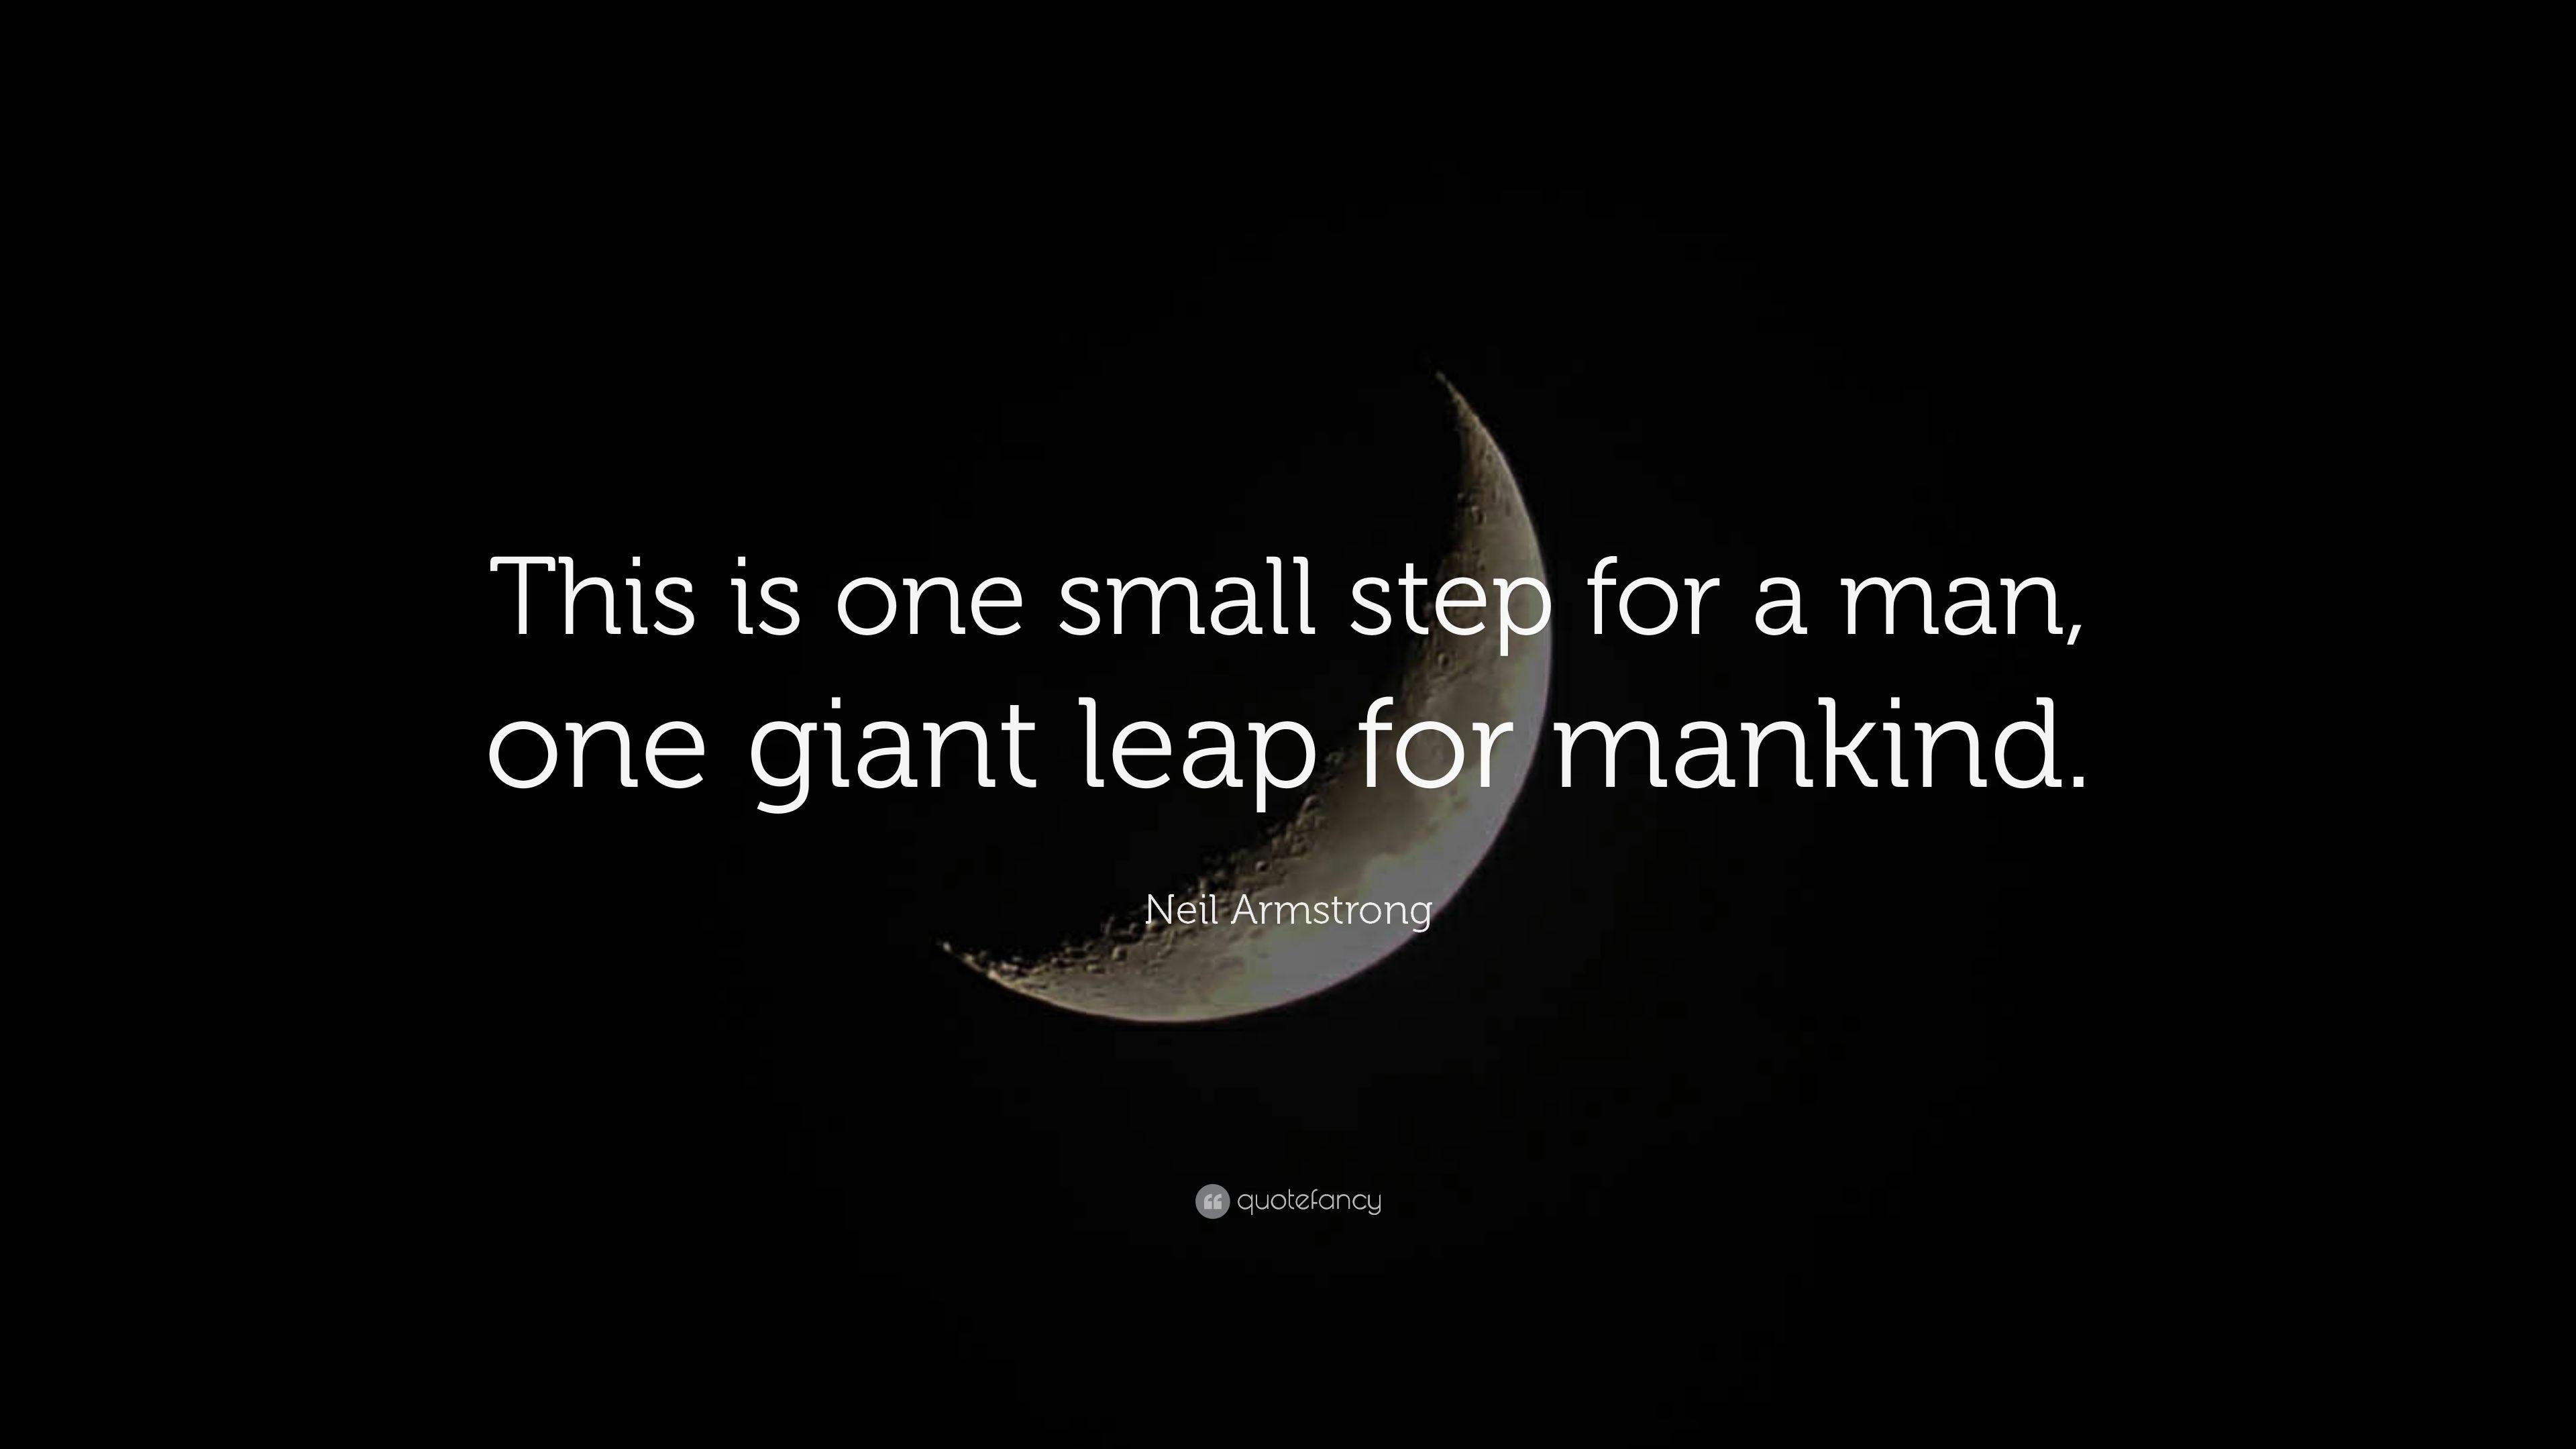 Neil Armstrong Quotes (70 wallpaper)